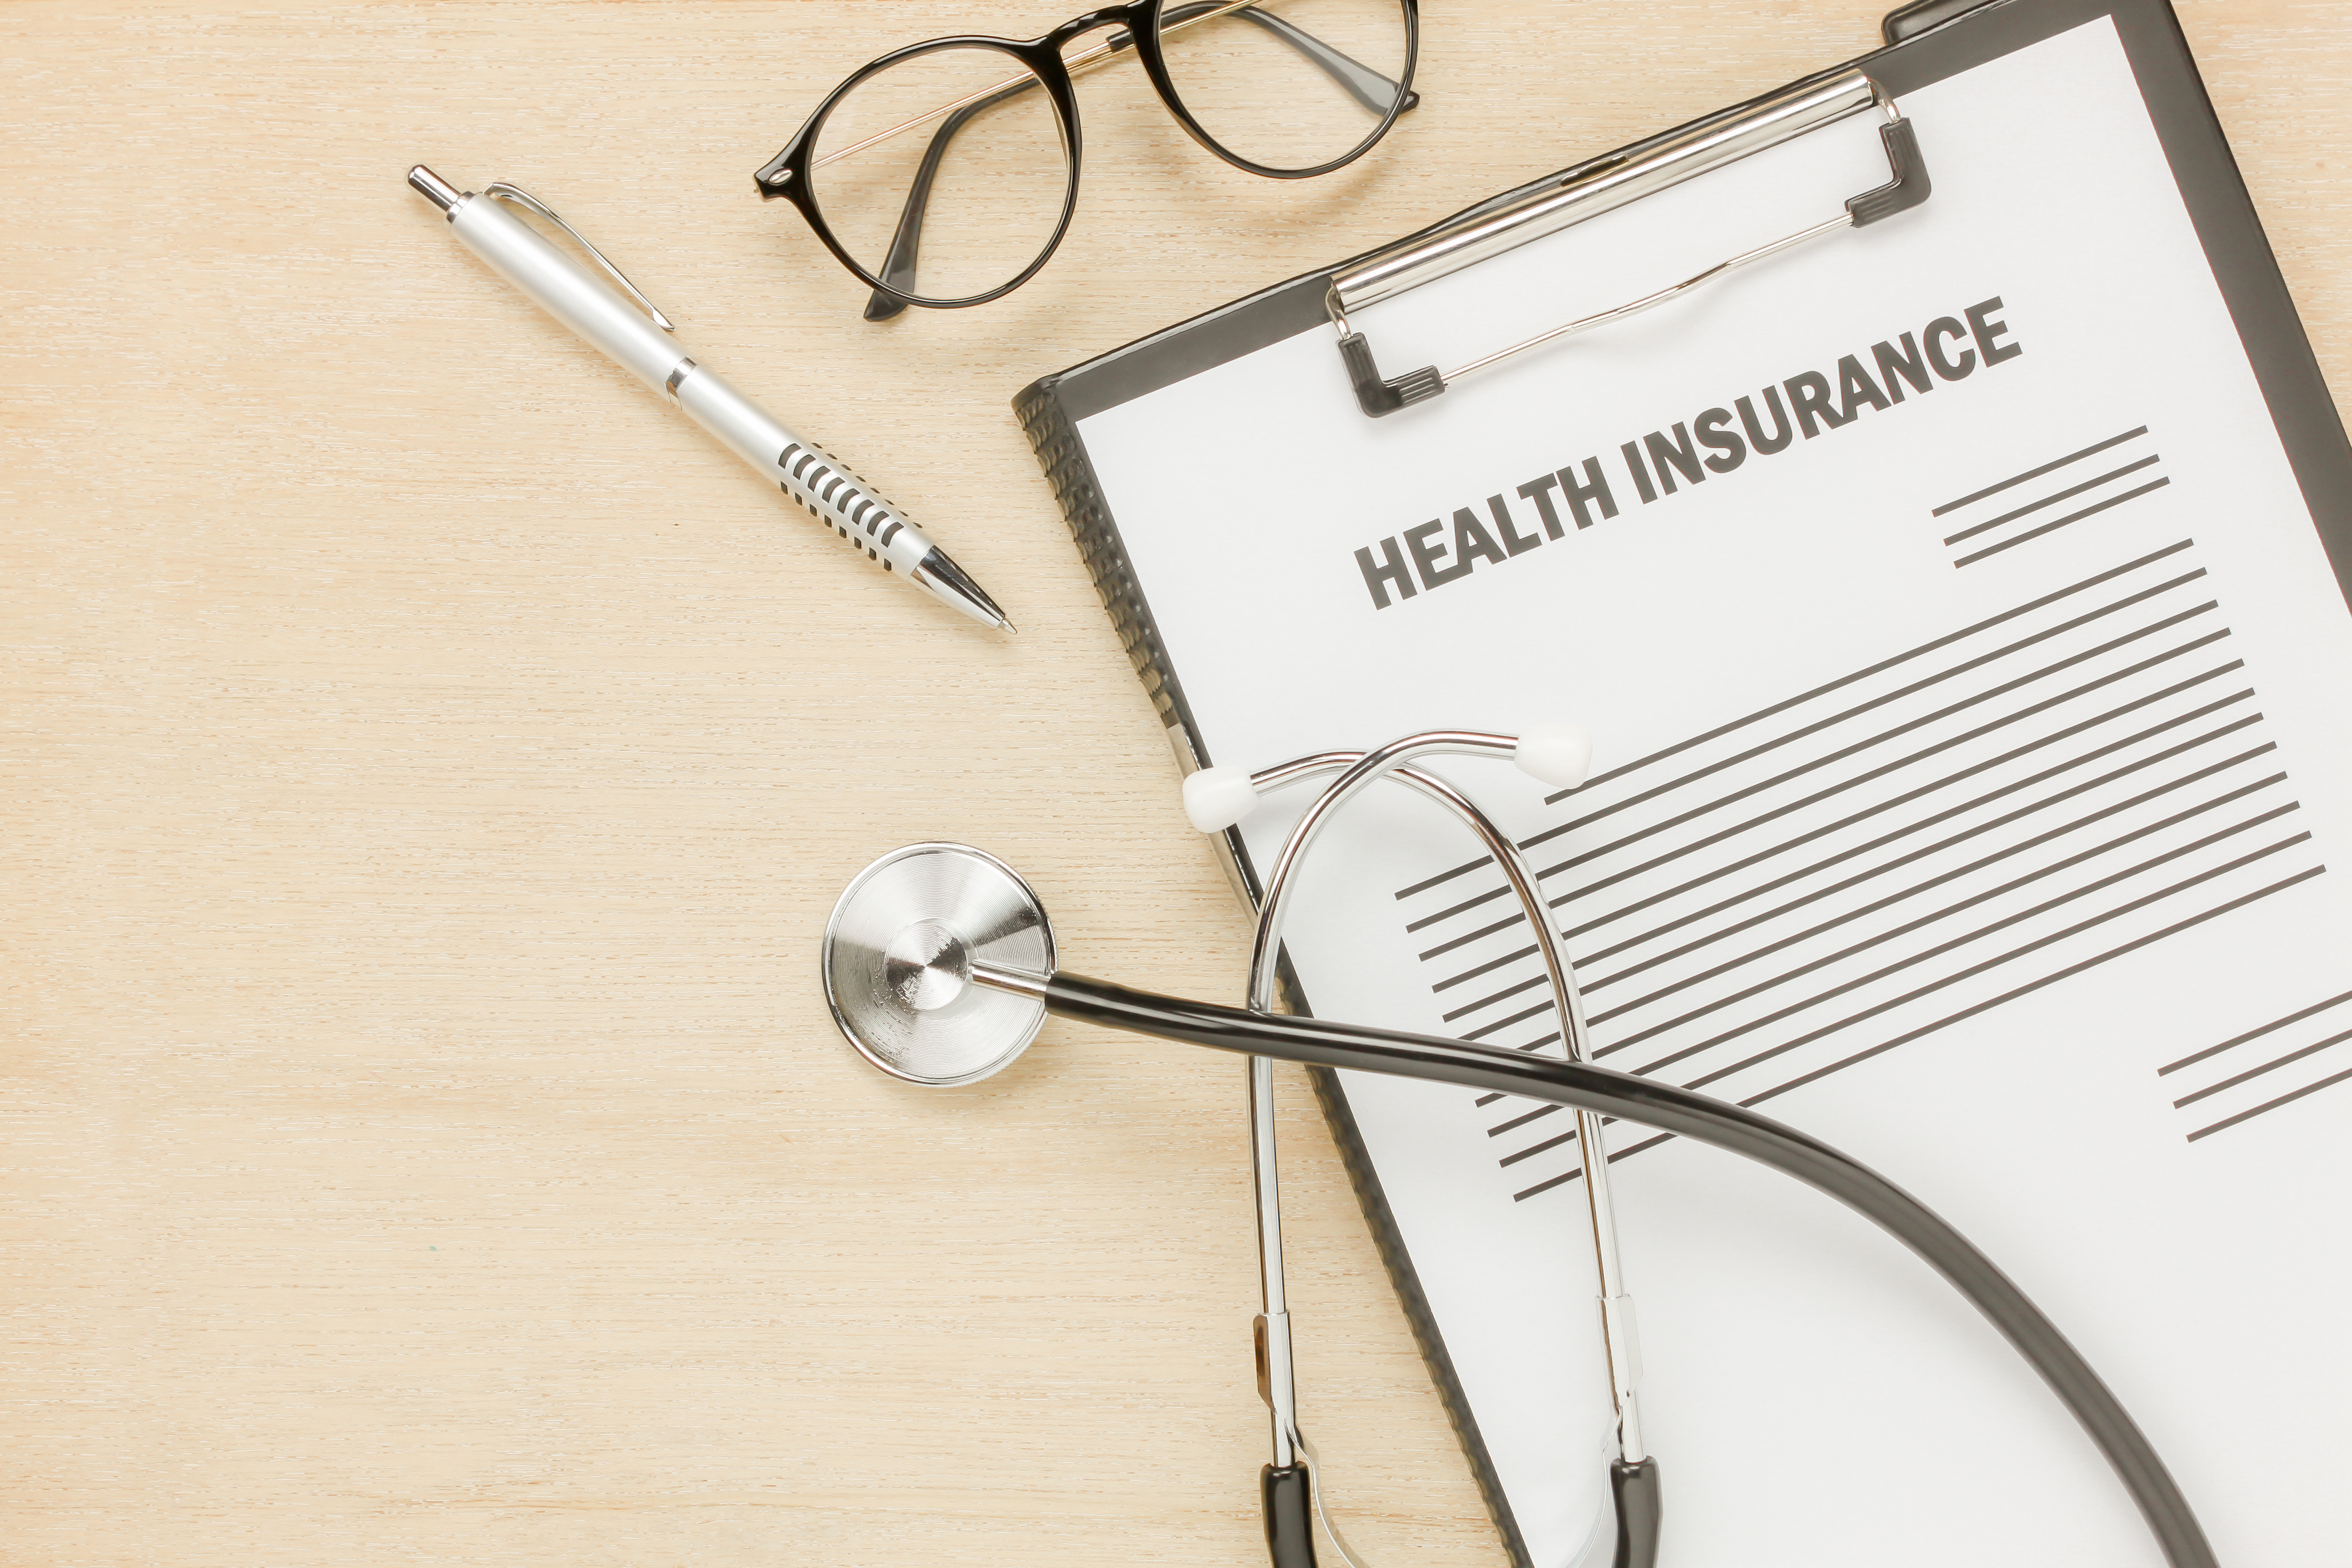 Health insurance form and healthcare 